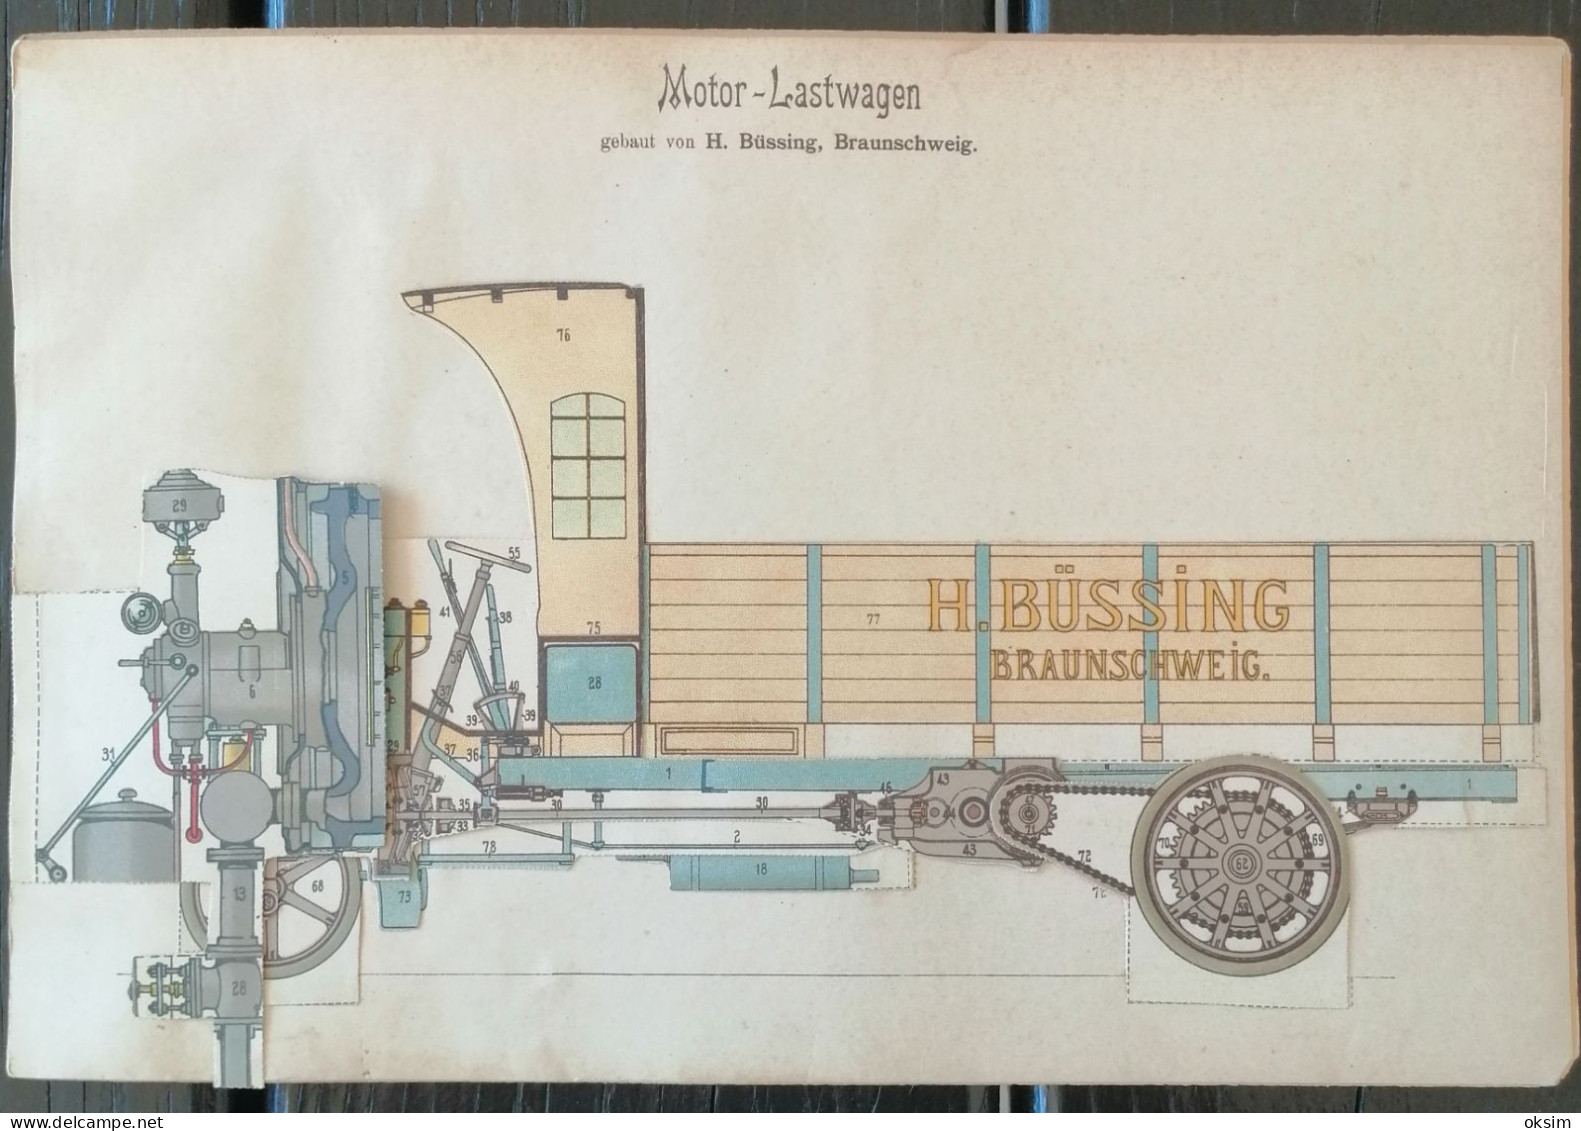 Drawings of machinery in colour, consisting of several layers that can be unfolded to show the interior of the machines